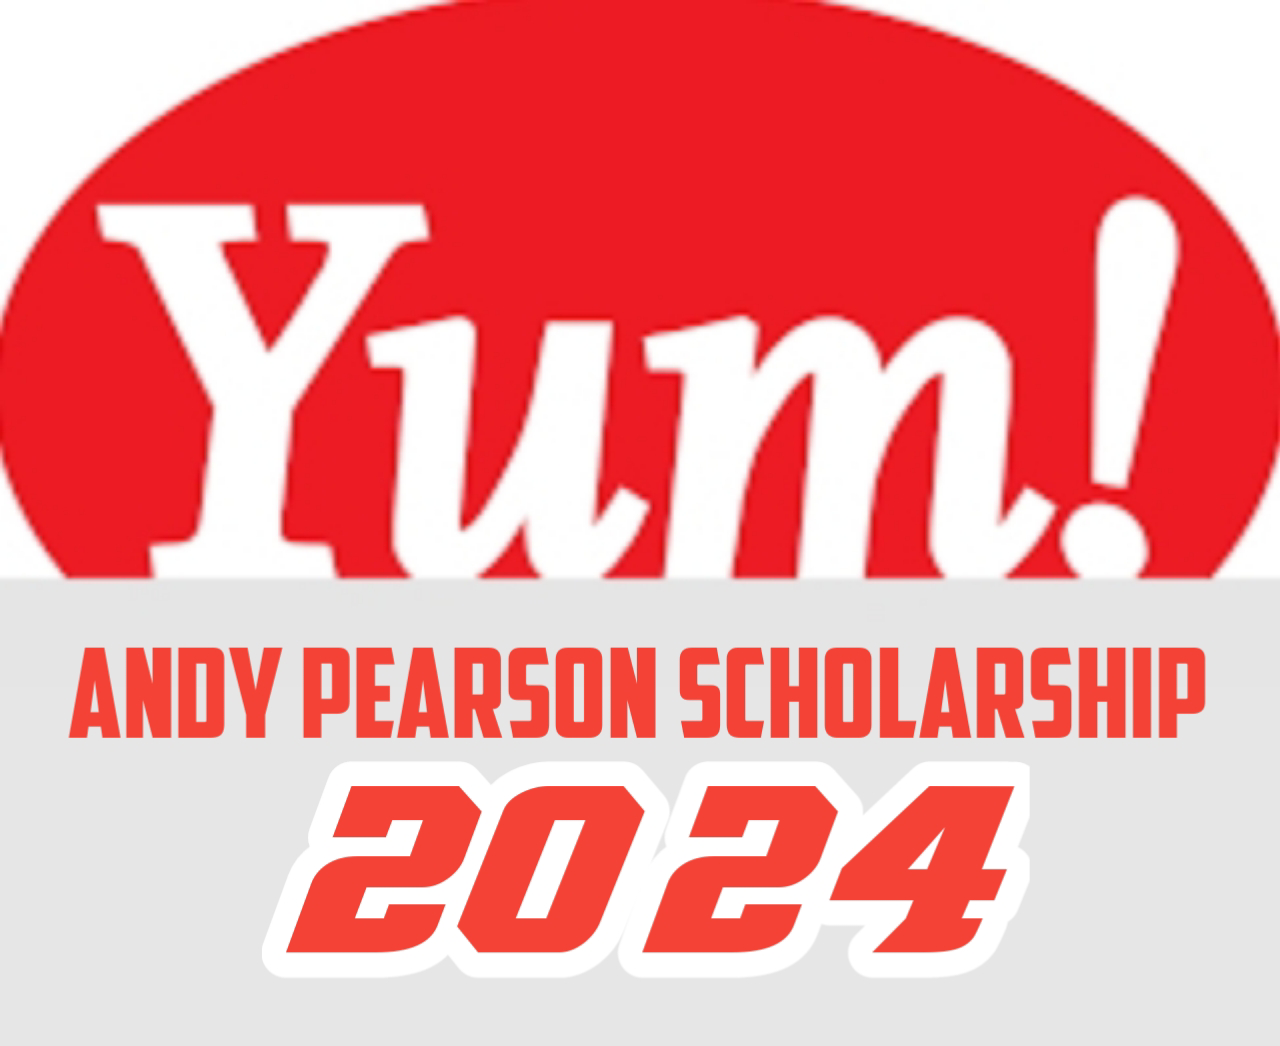 Andy pearson Scholarship: All you need to know About Andy peason scholarship 2024